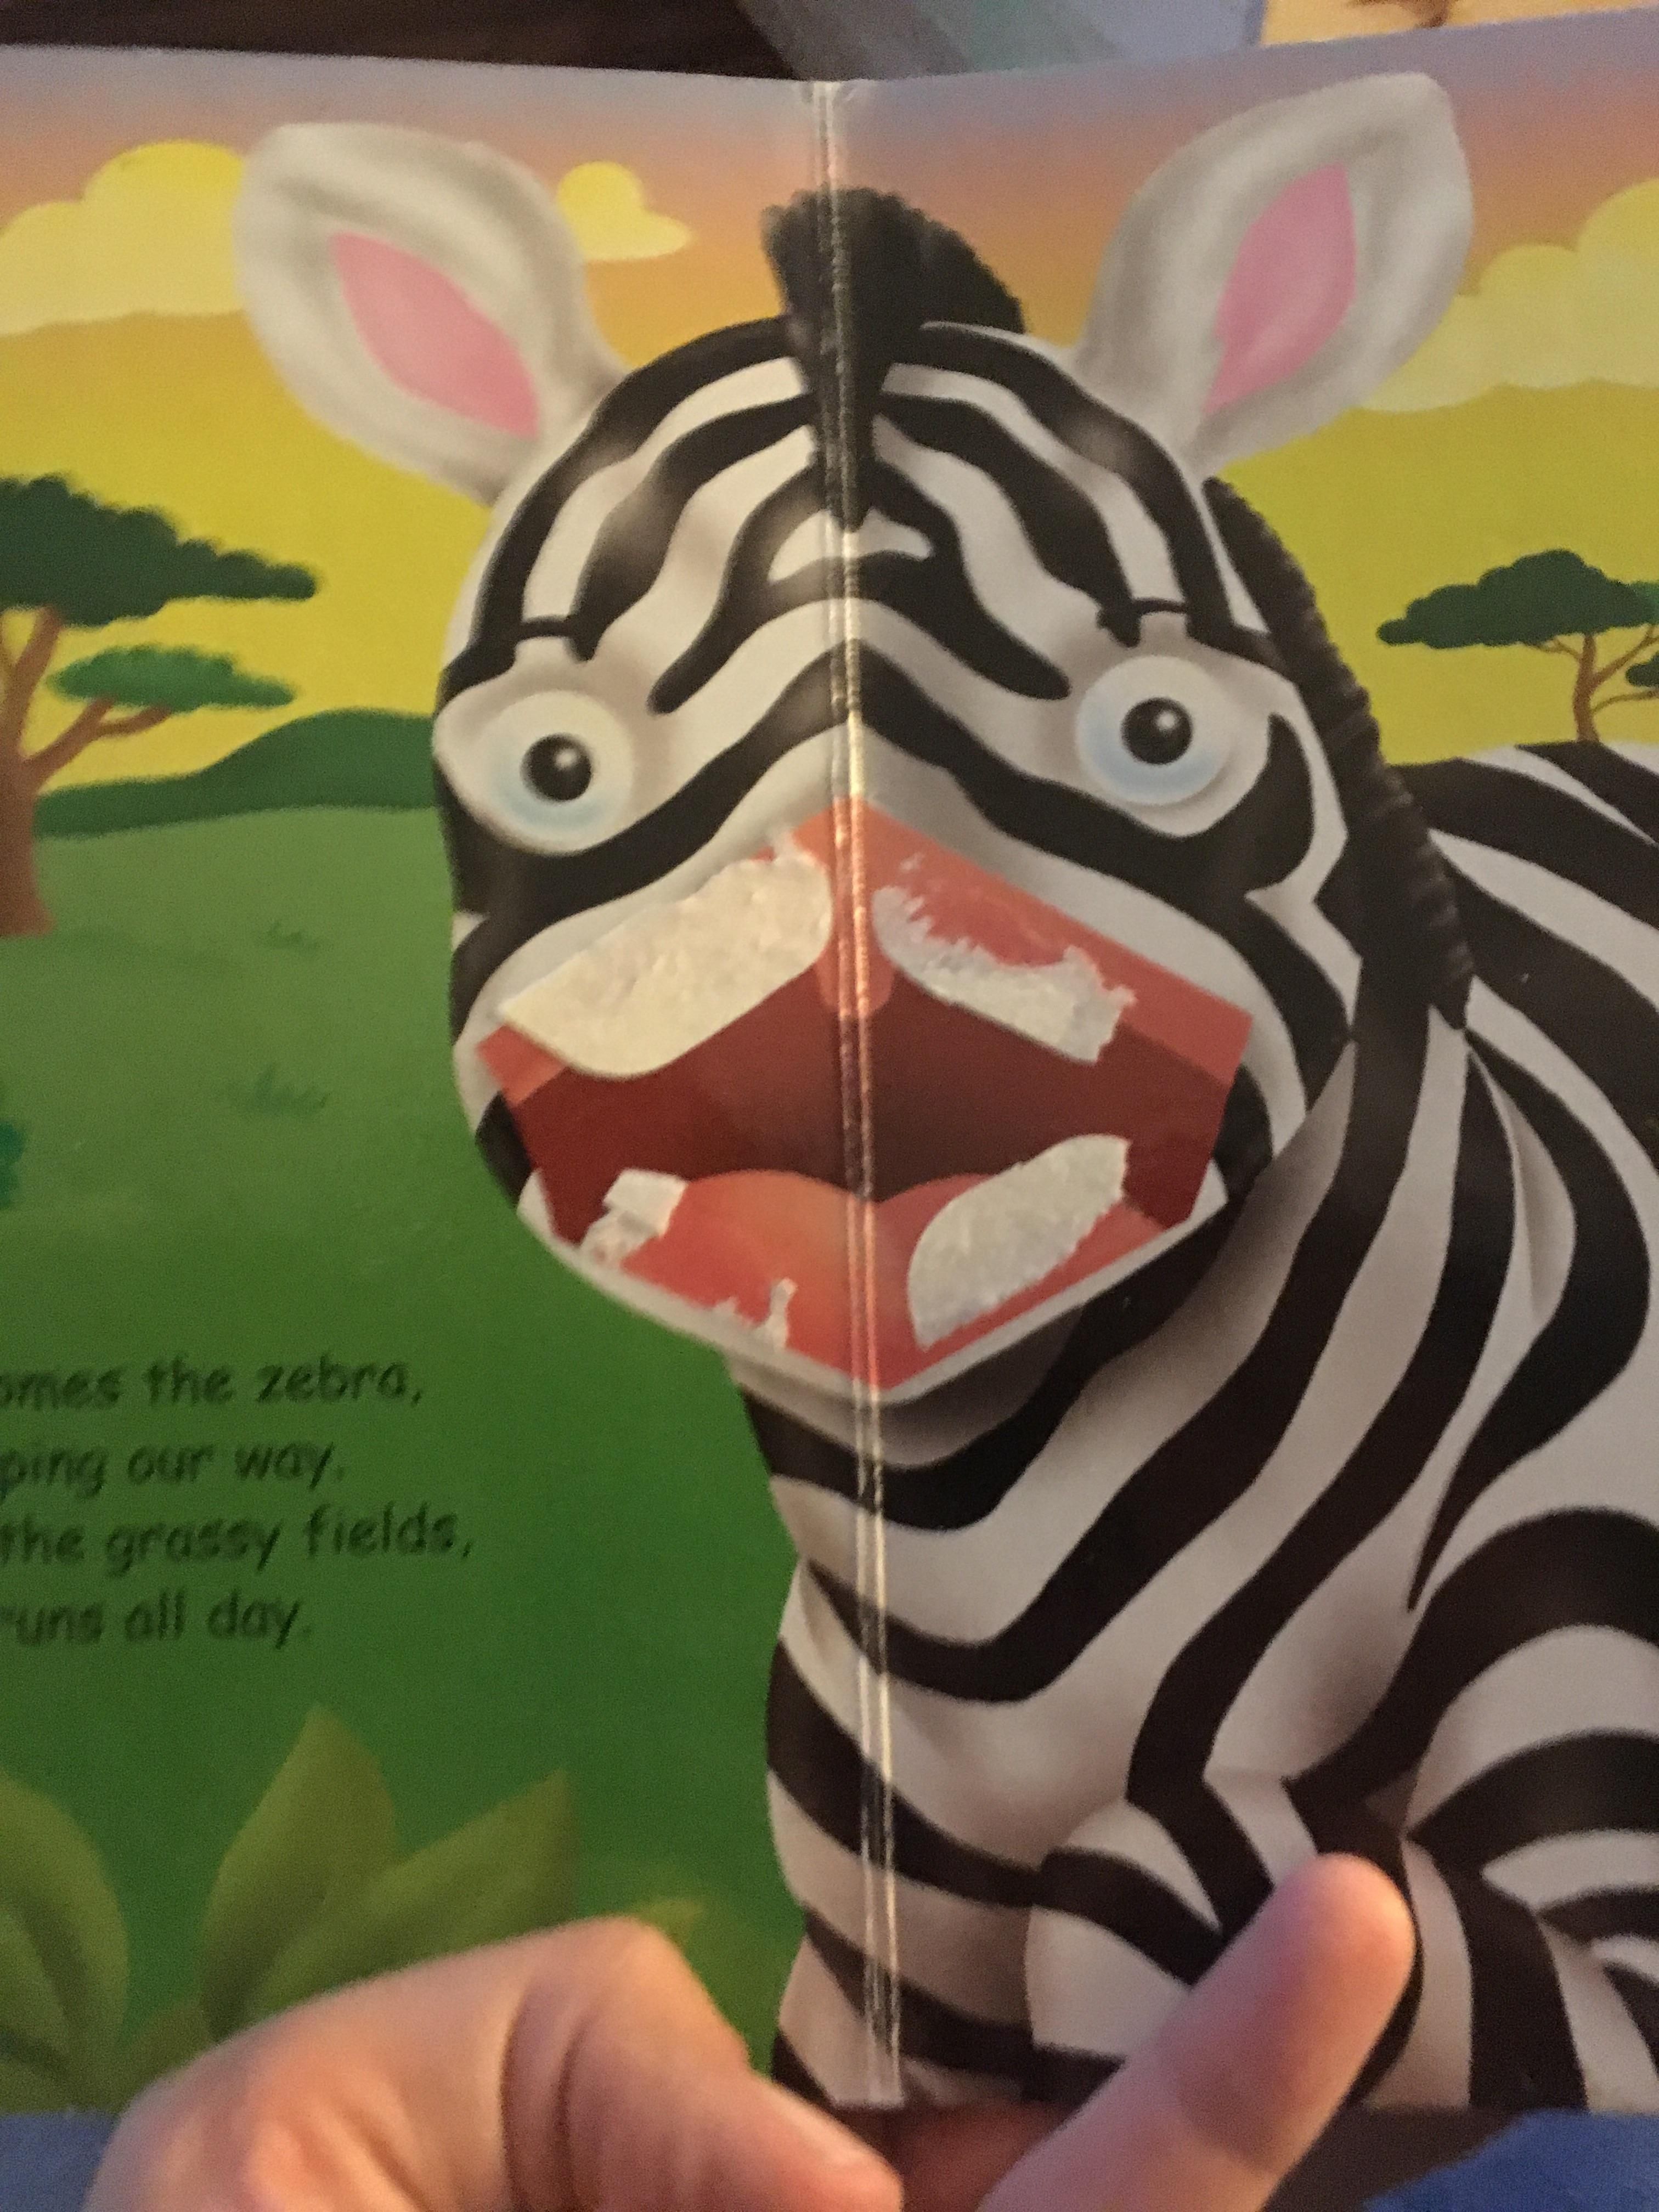 My son pulled the "pop ups" out of this book and it's a special kind of terrifying.